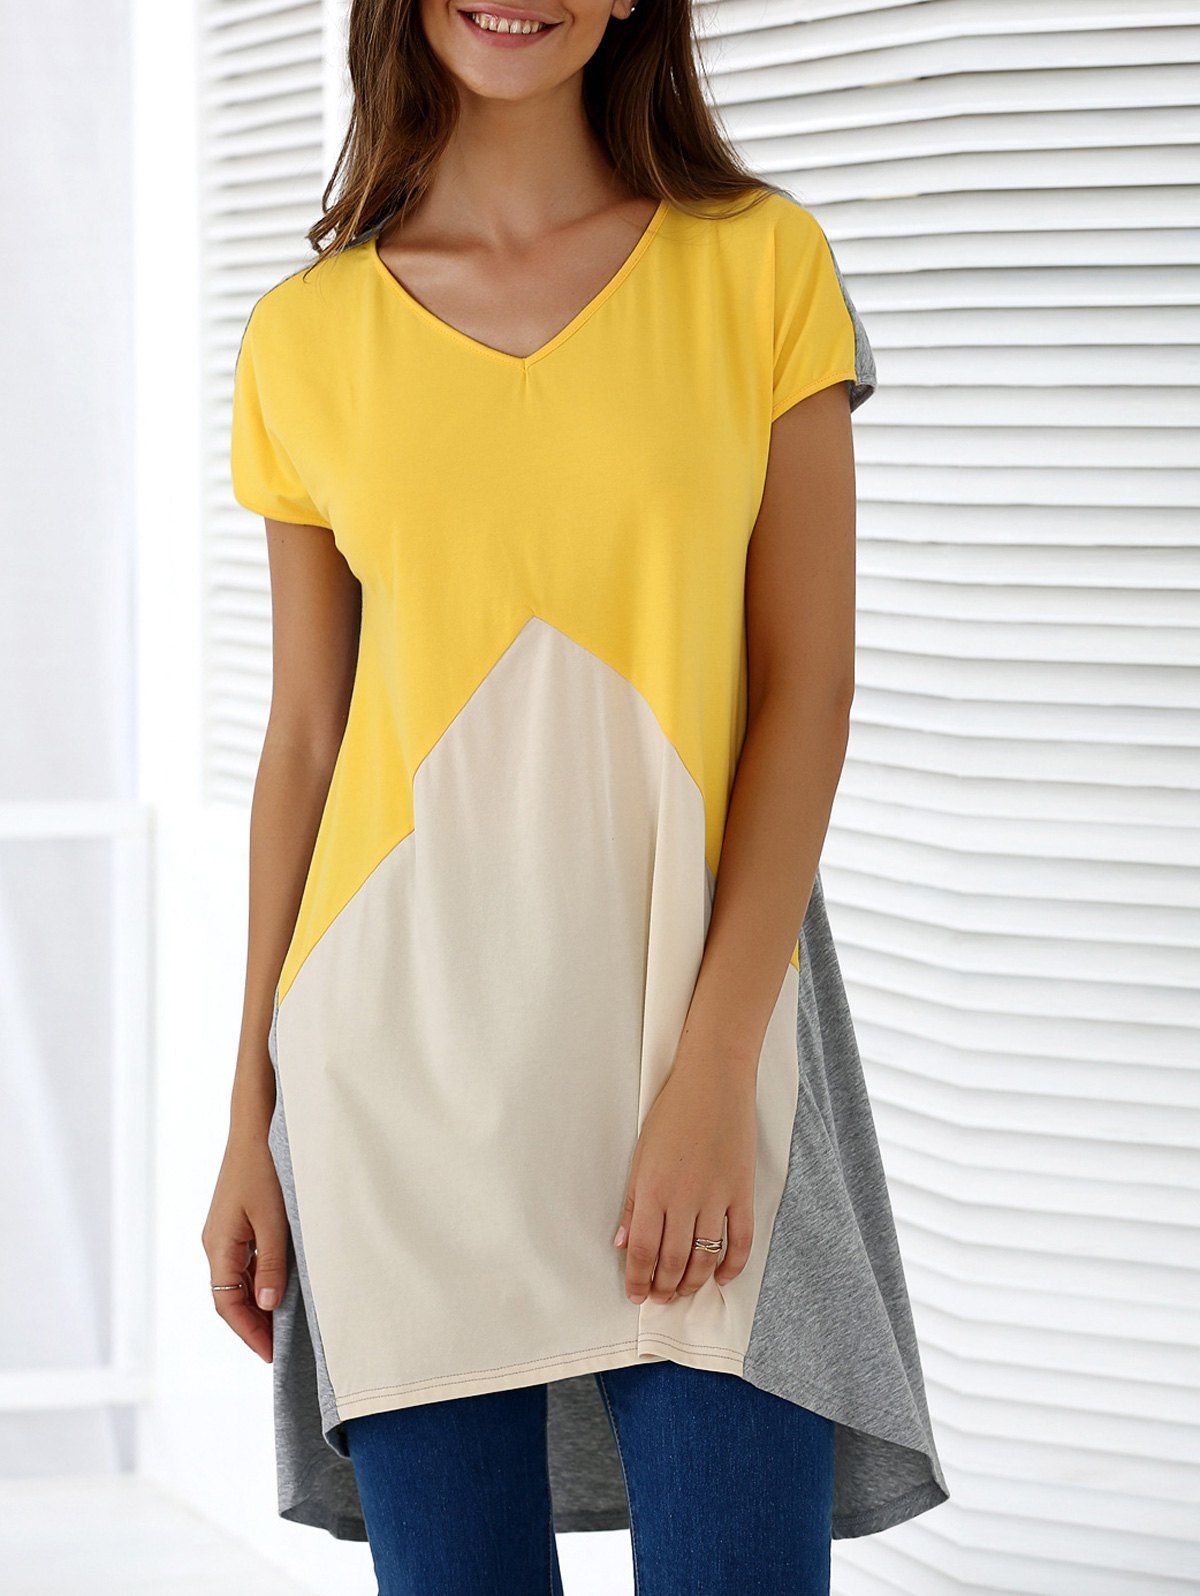 Fashionable Women's V-Neck Short Sleeve Contrast Color Loose-Fitting Blouse